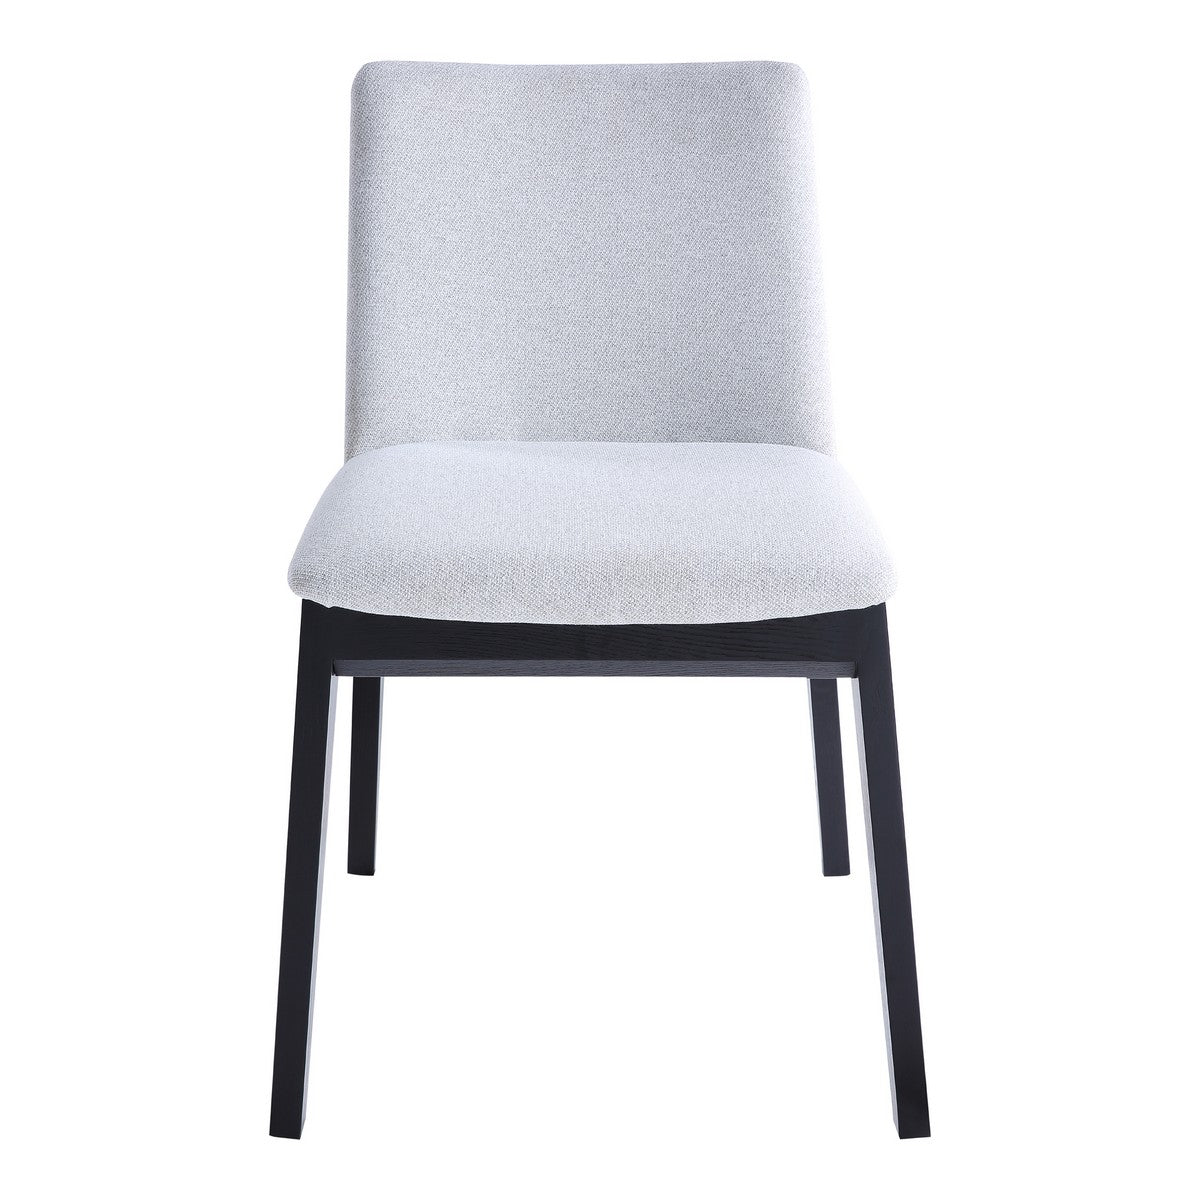 Moe's Home Collection Deco Ash Dining Chair Light Grey-Set of Two - BC-1095-29 - Moe's Home Collection - Dining Chairs - Minimal And Modern - 1